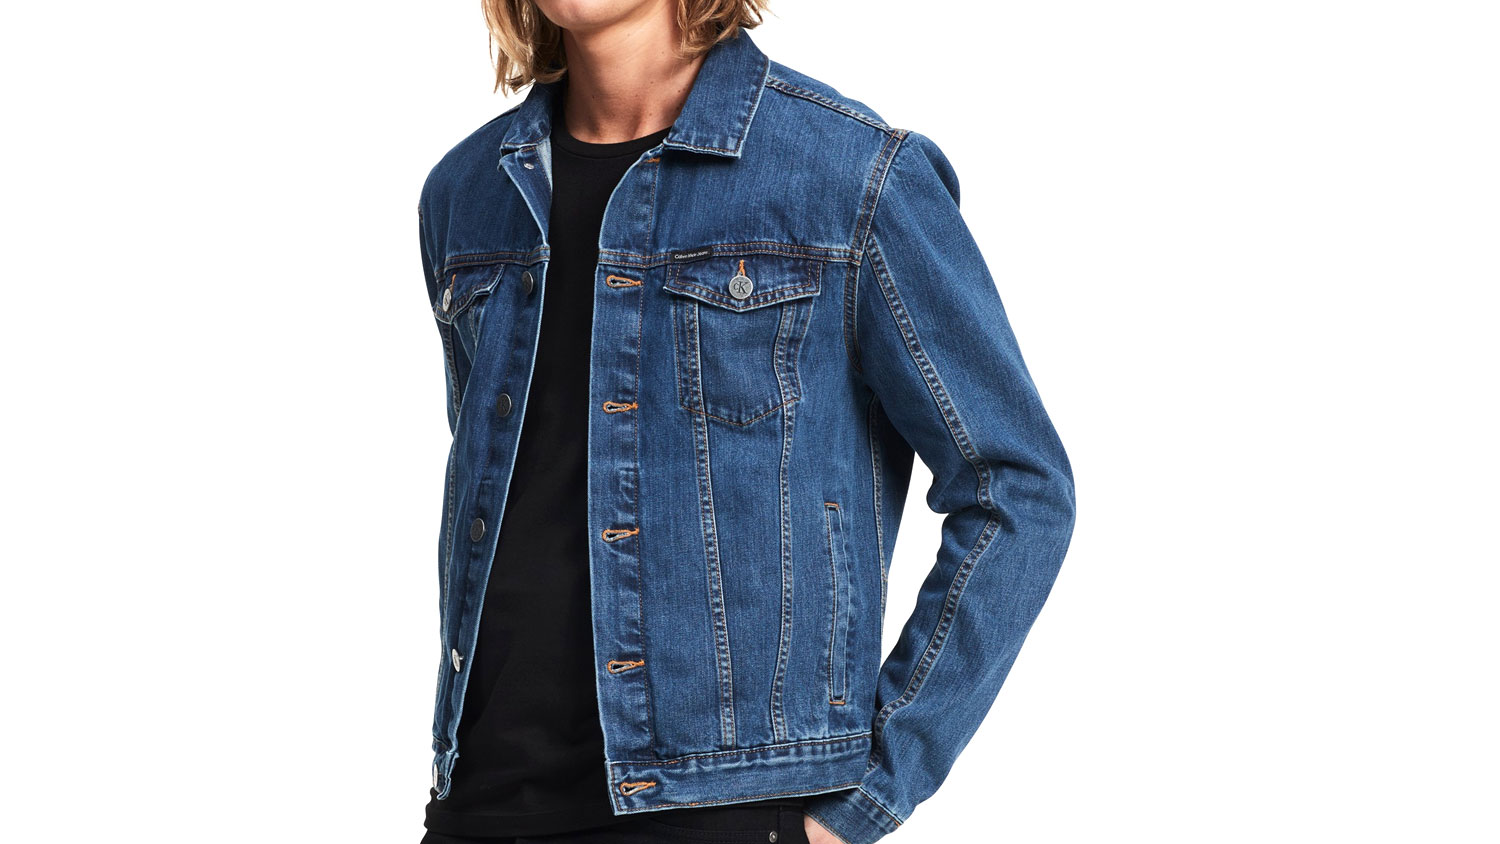 Our Top Picks for the Best Men's Denim Jackets - The Manual